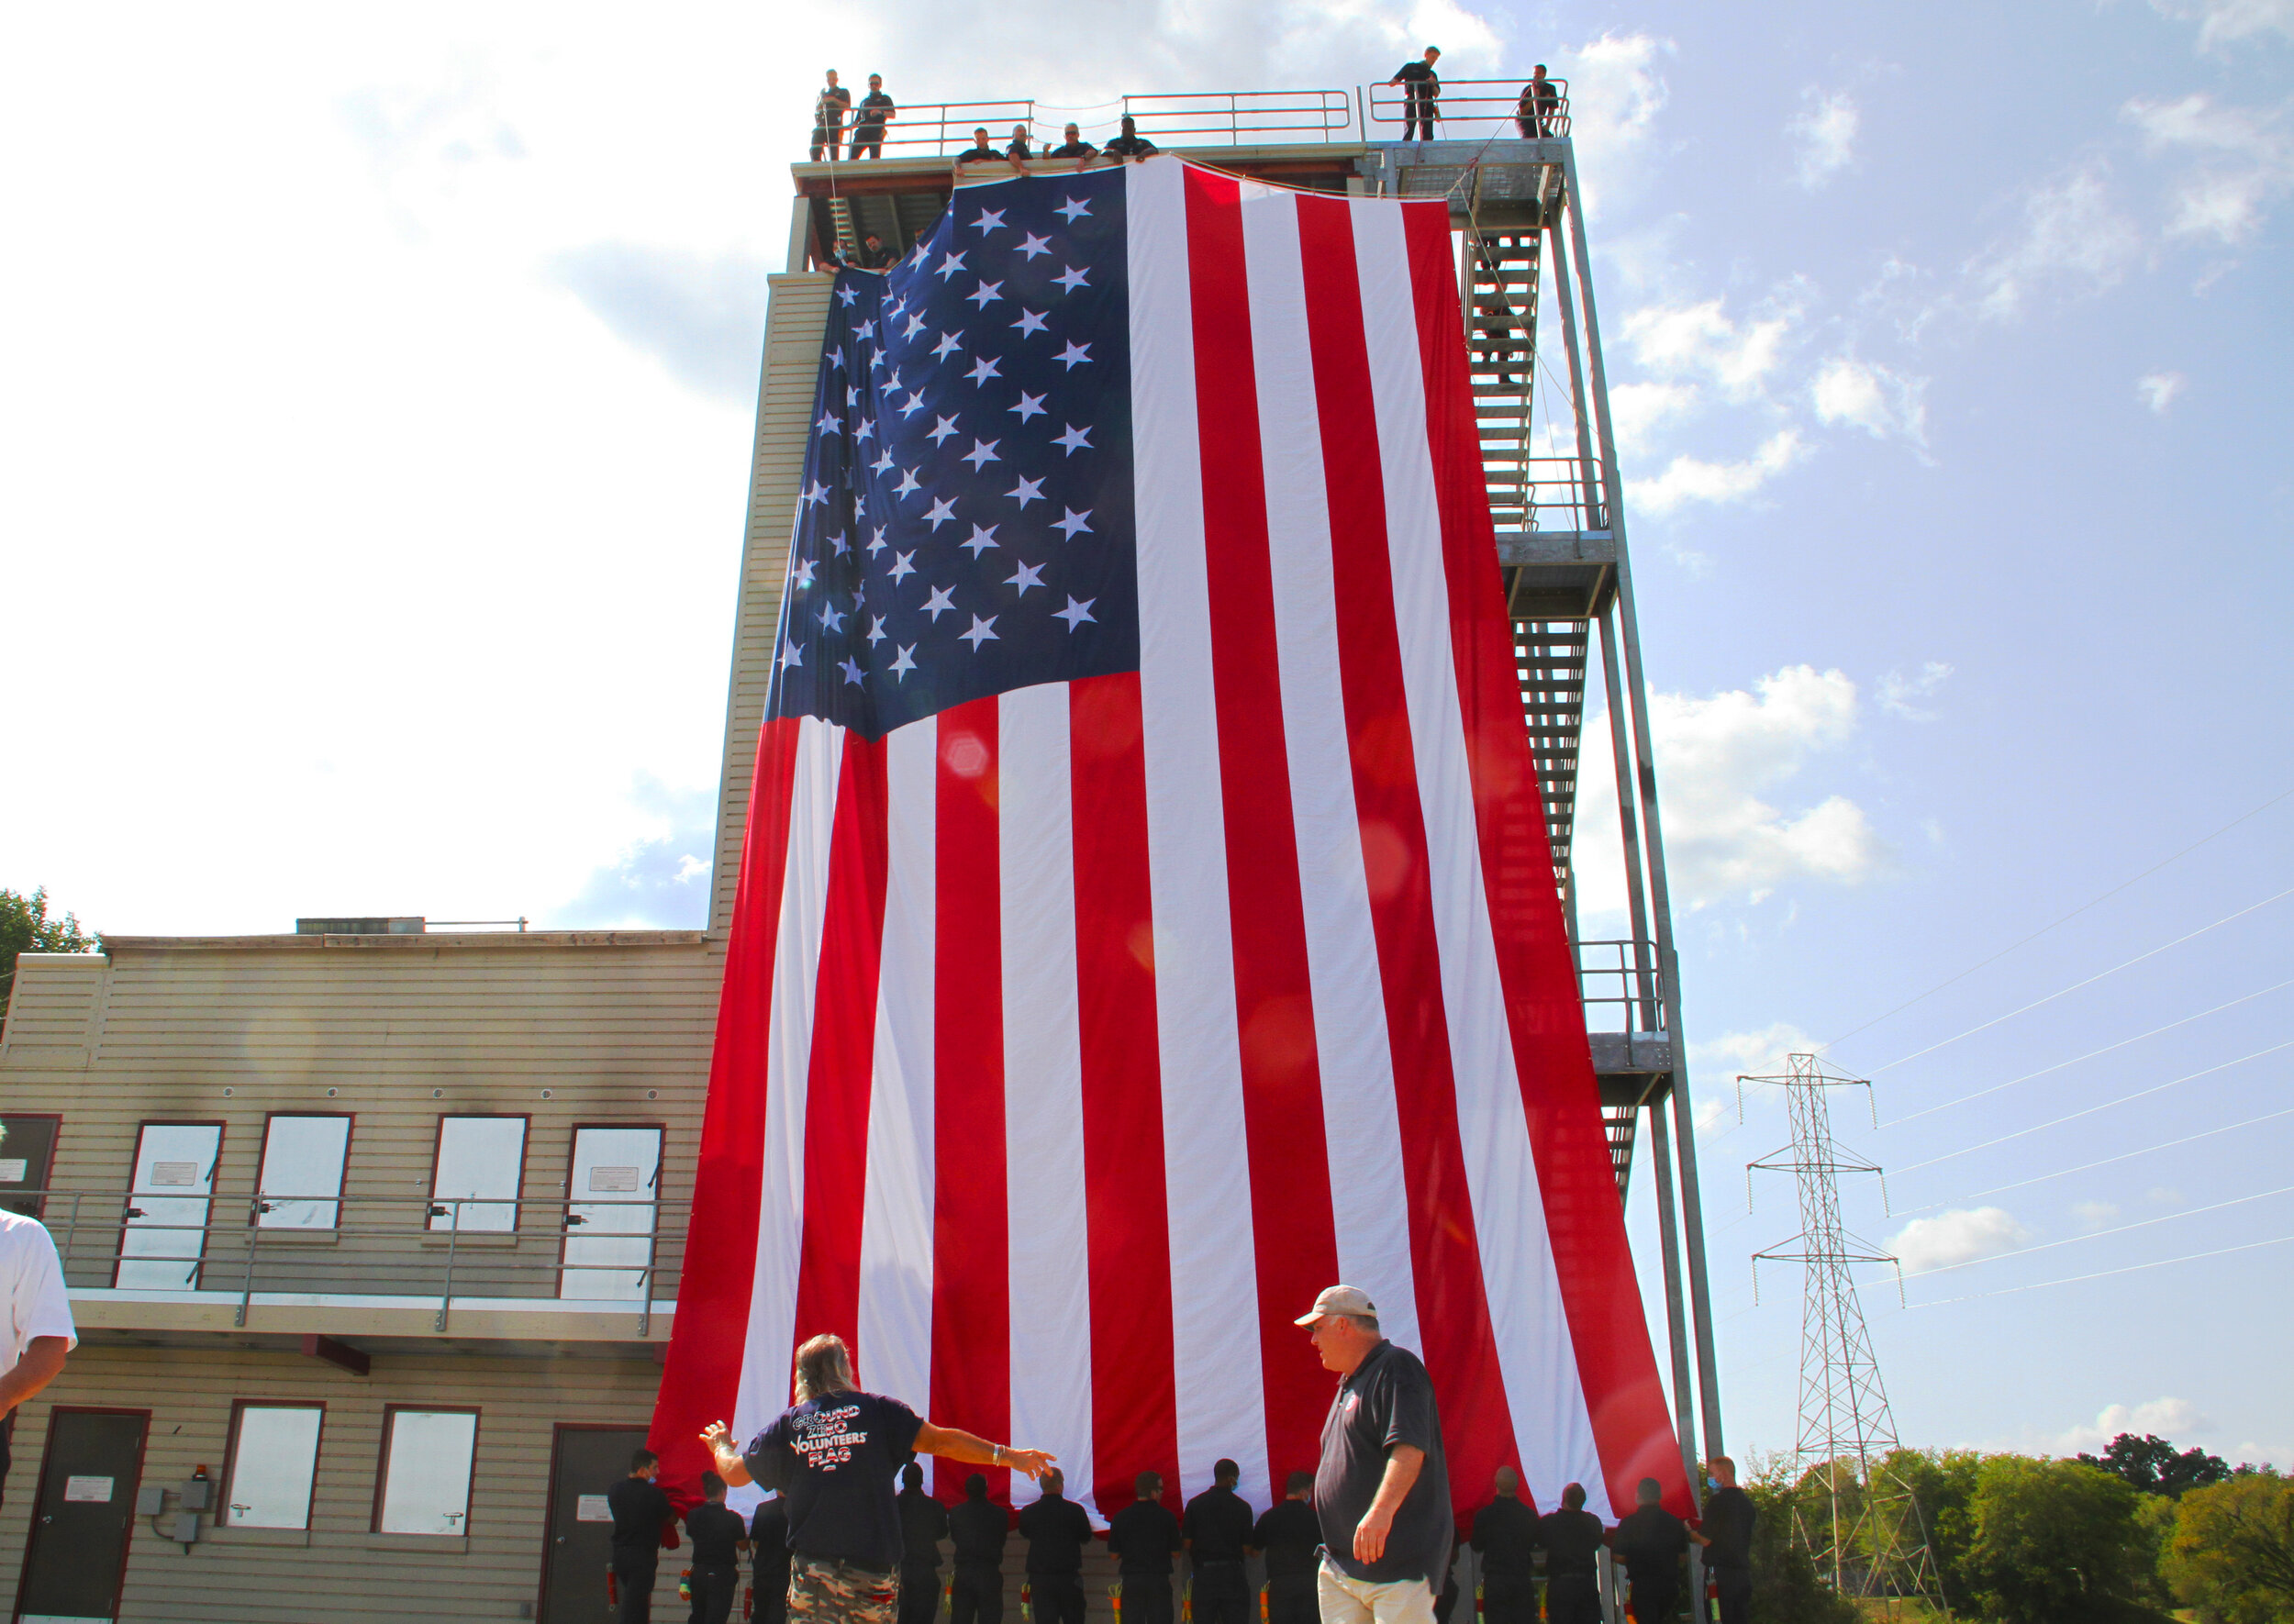  2020 9/11 Tribute Nashville Fire Department Training Grounds – 9/11 REMEMBERED 2020 – Photo: Cierra Mazzola – All Rights Reserved 